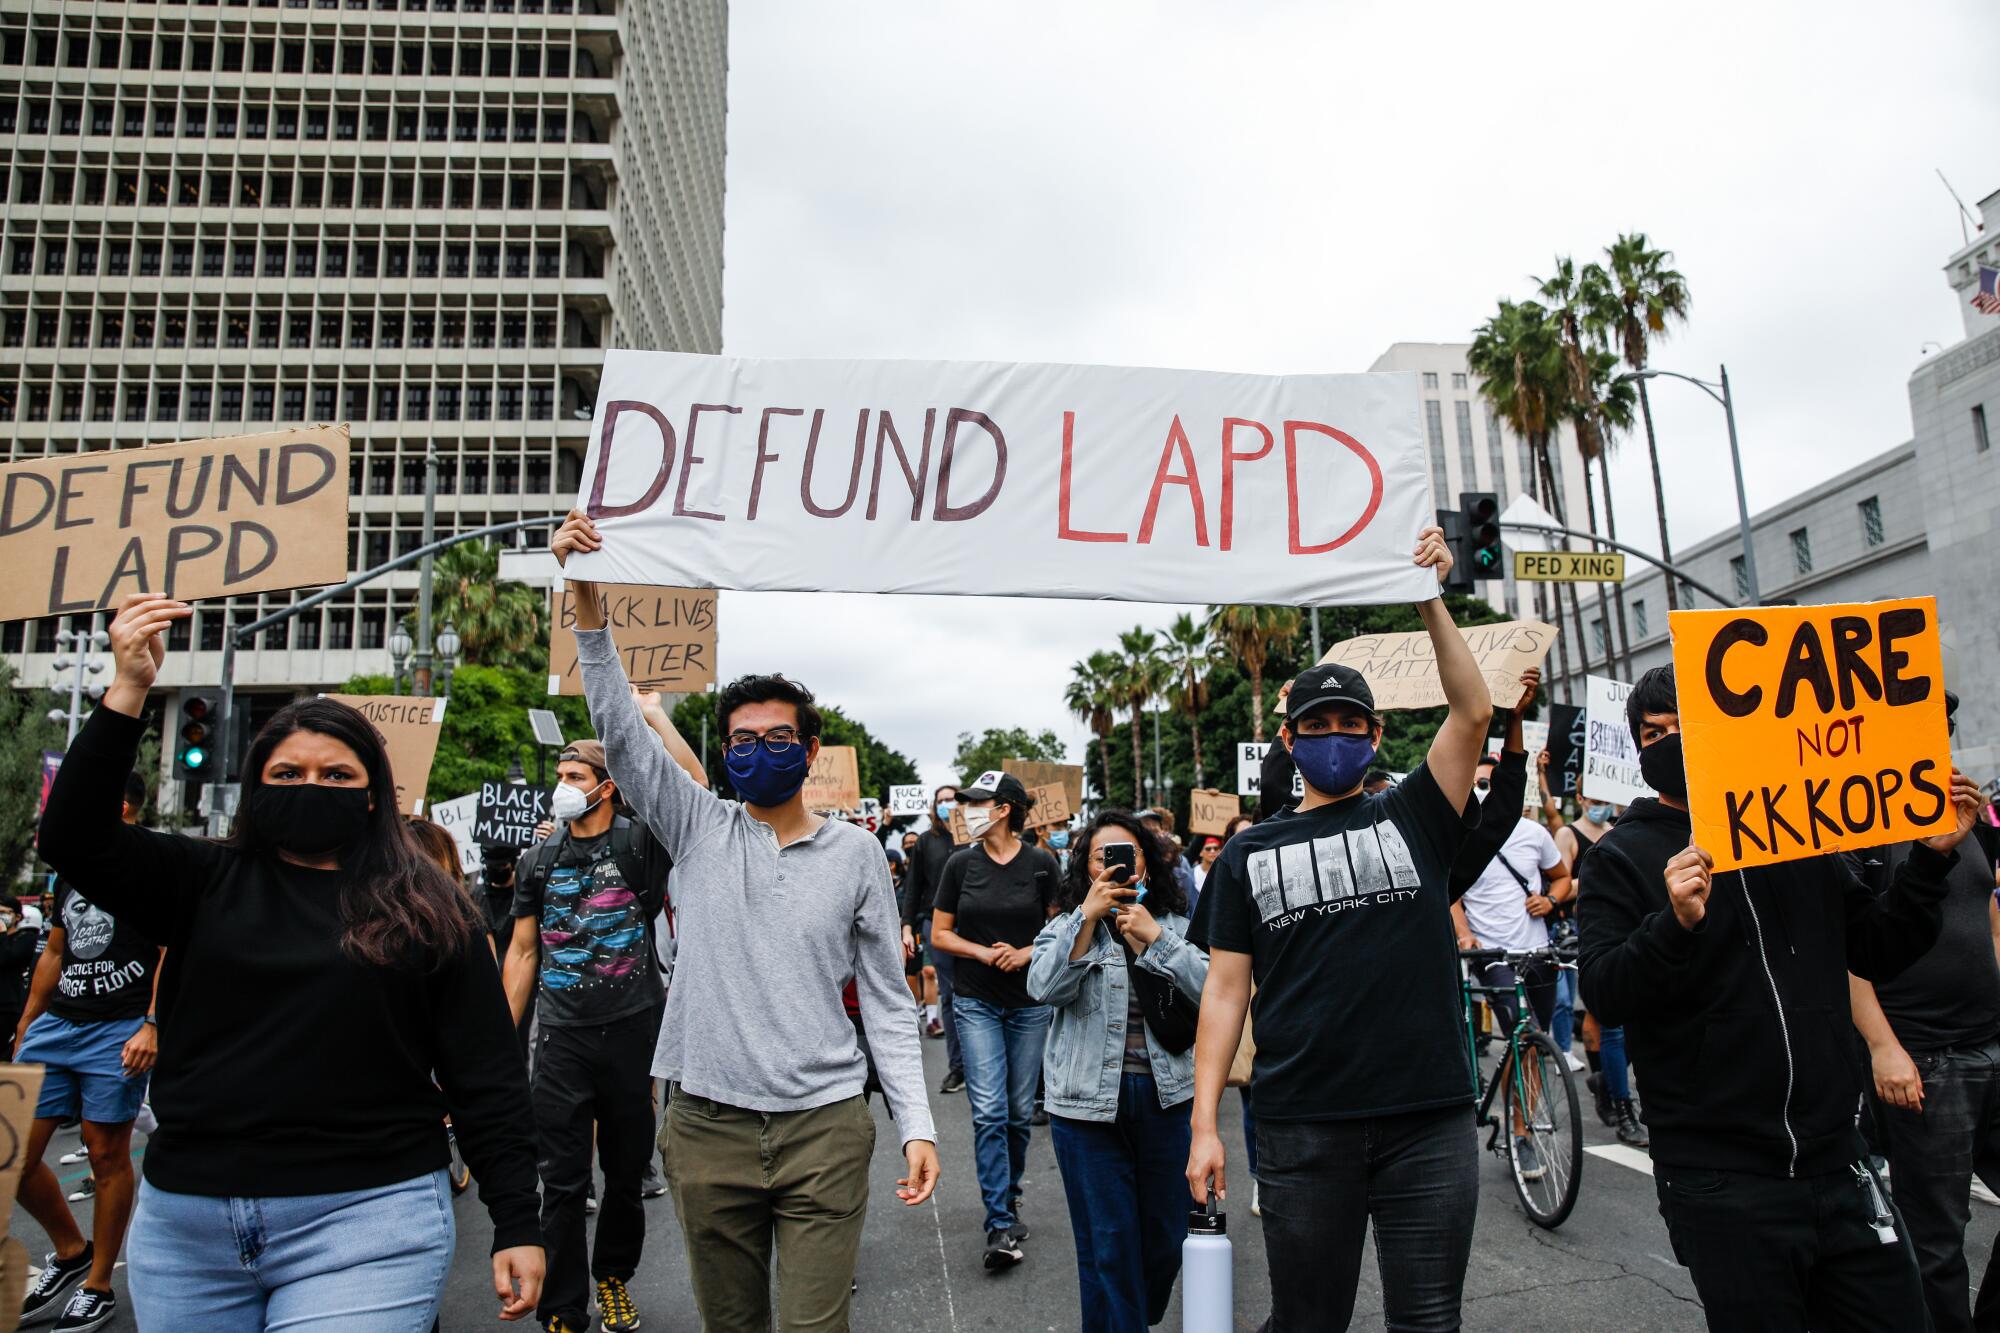 "Defund LAPD" signs held by marchers at a protest honoring George Floyd and in support of Black Lives Matter.